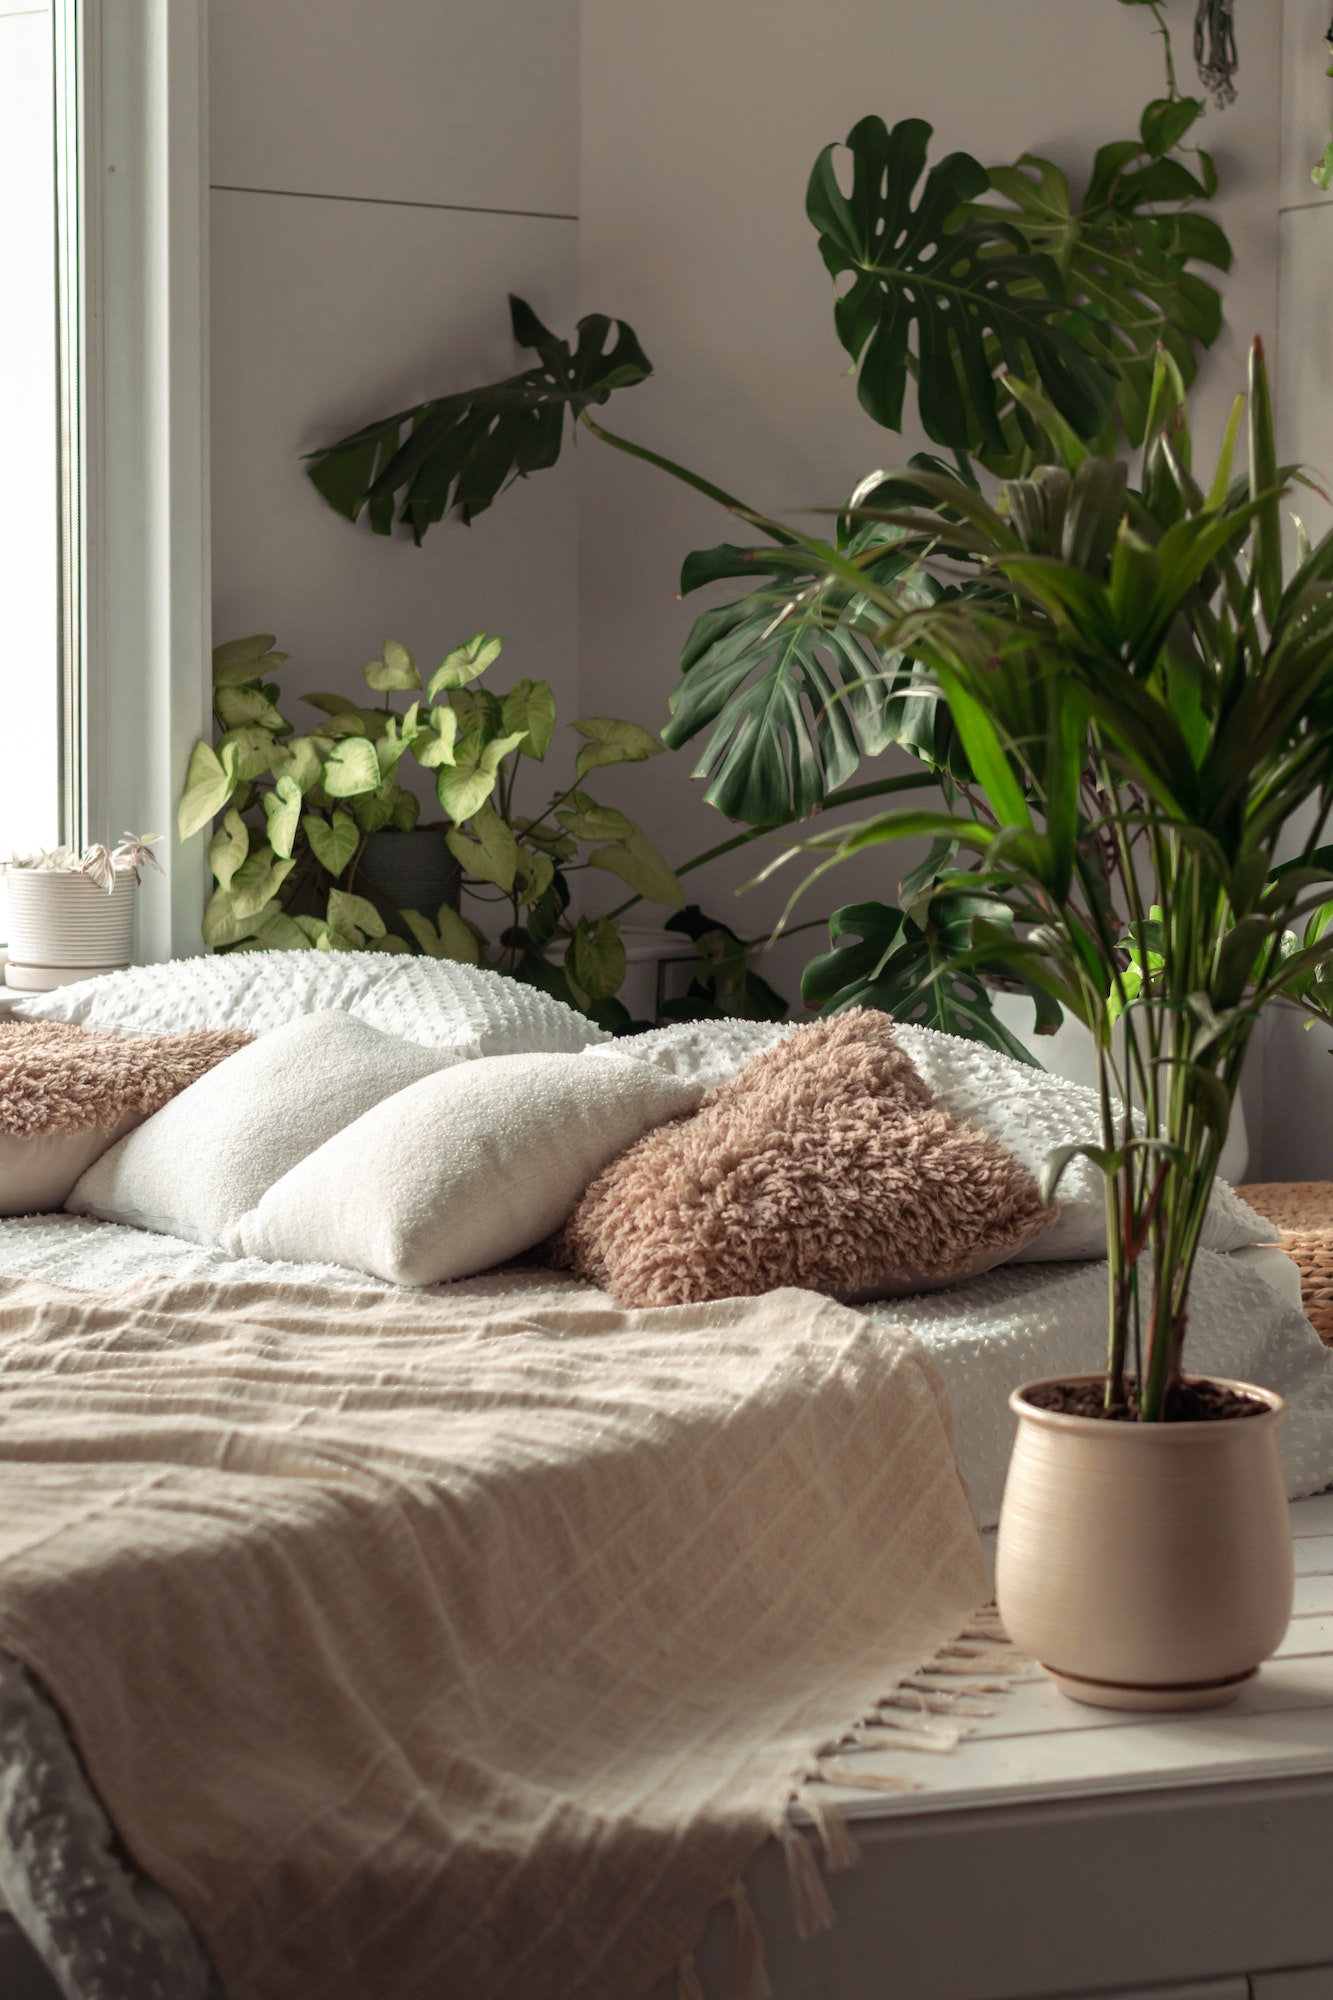 The interior of a bright bedroom with indoor plants.